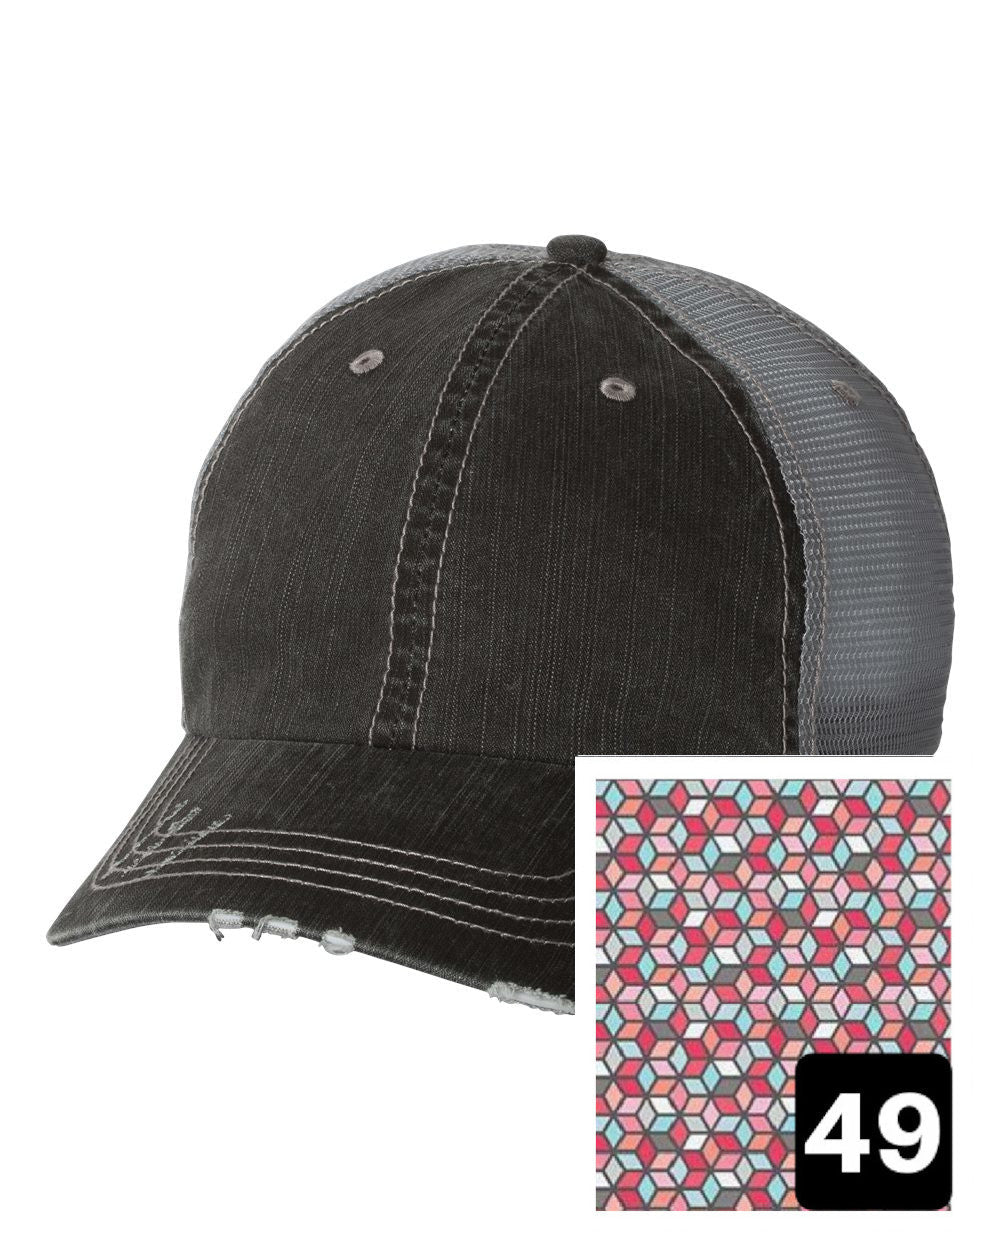 gray distressed trucker hat with black with white hatch fabric state of Georgia